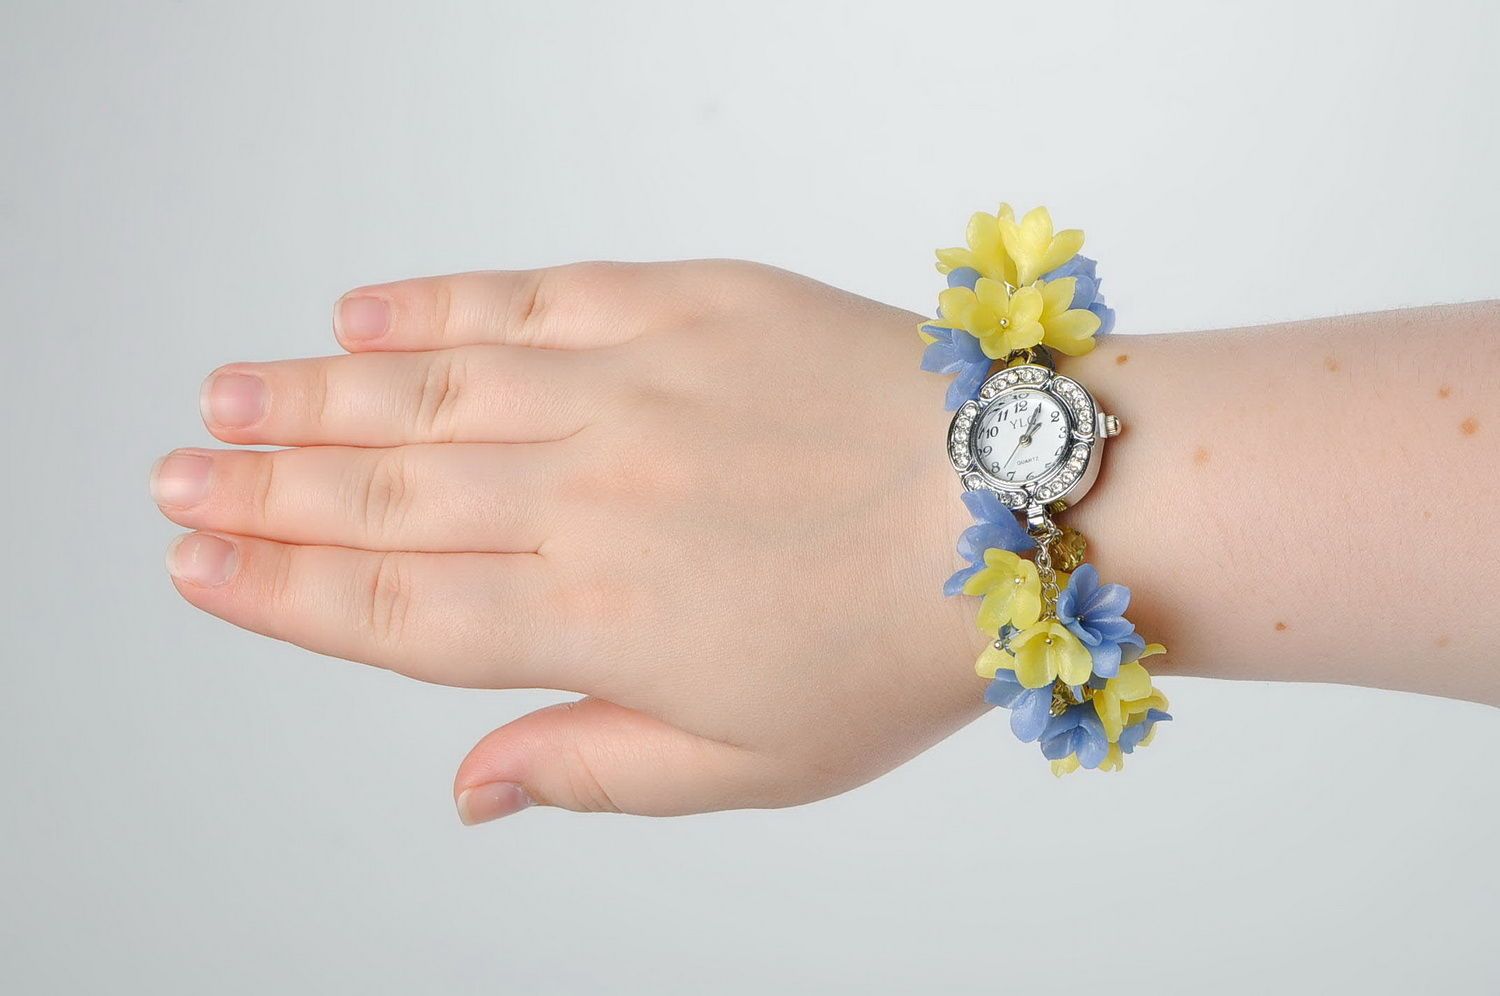 Watch with flowers made of polymer clay, watch with metal strap photo 2